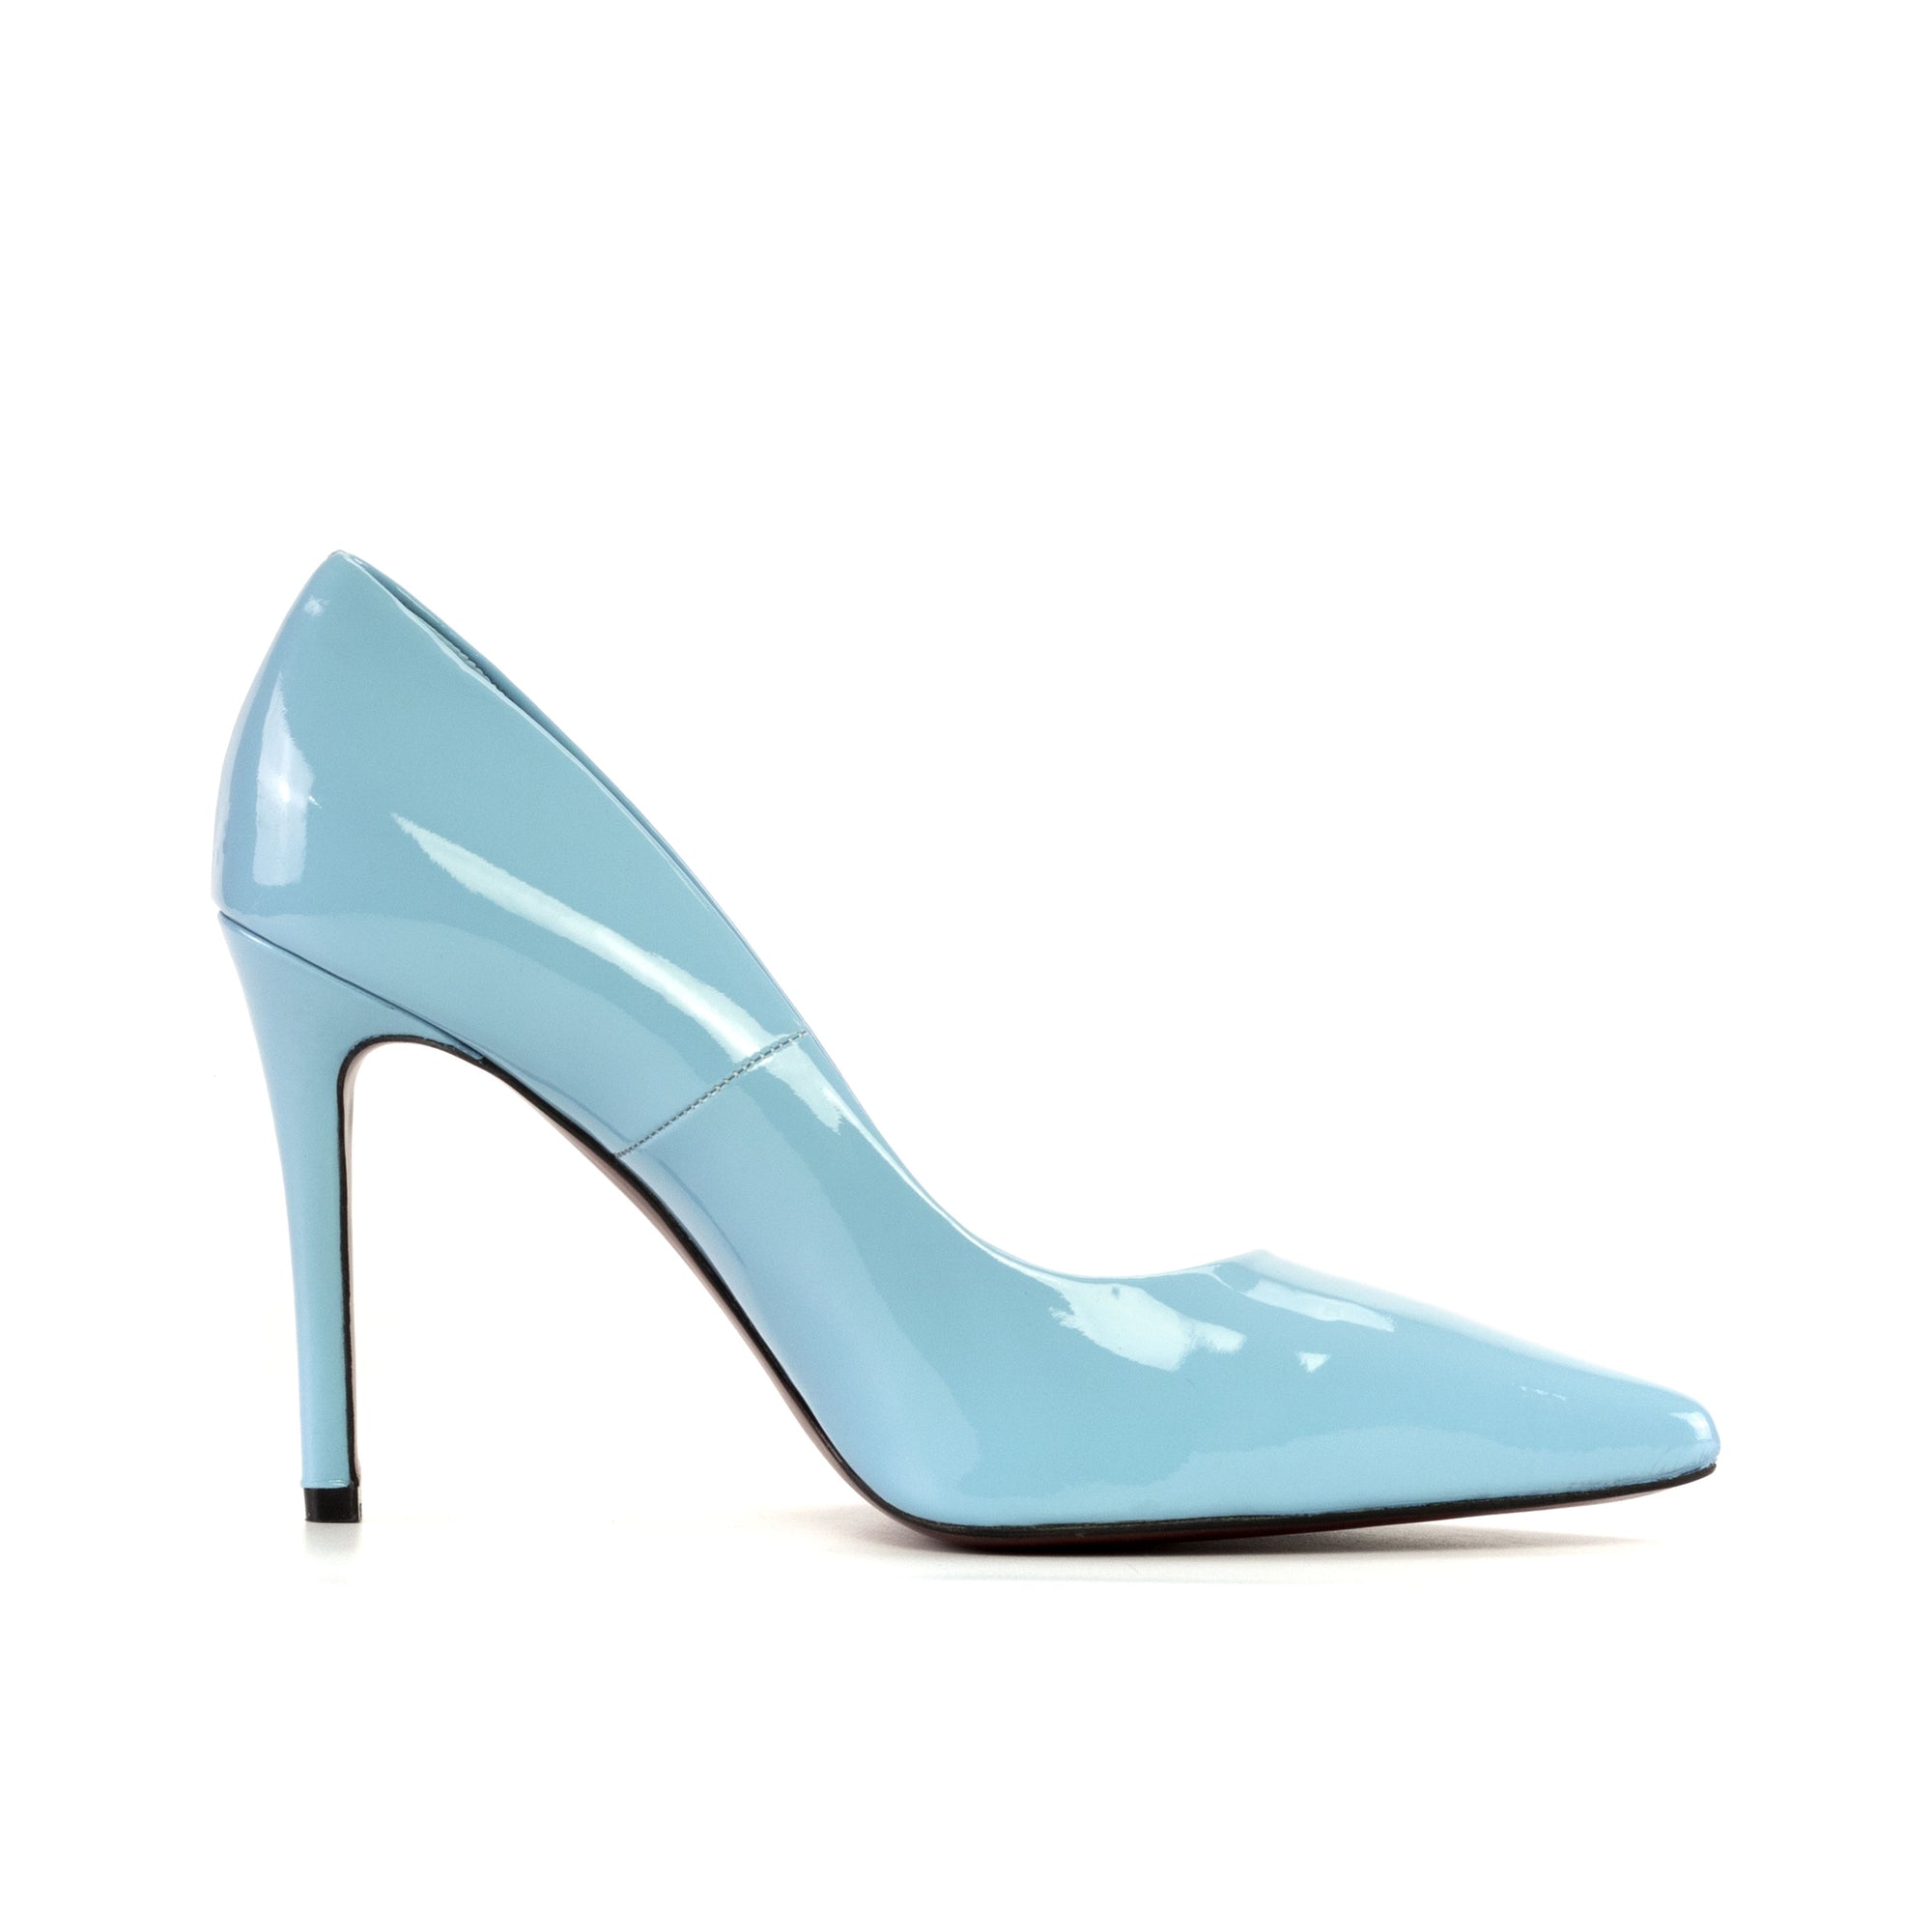 Handmade Blue Patent Leather High Heels - A Symphony of Craftsmanship, Comfort, and Style